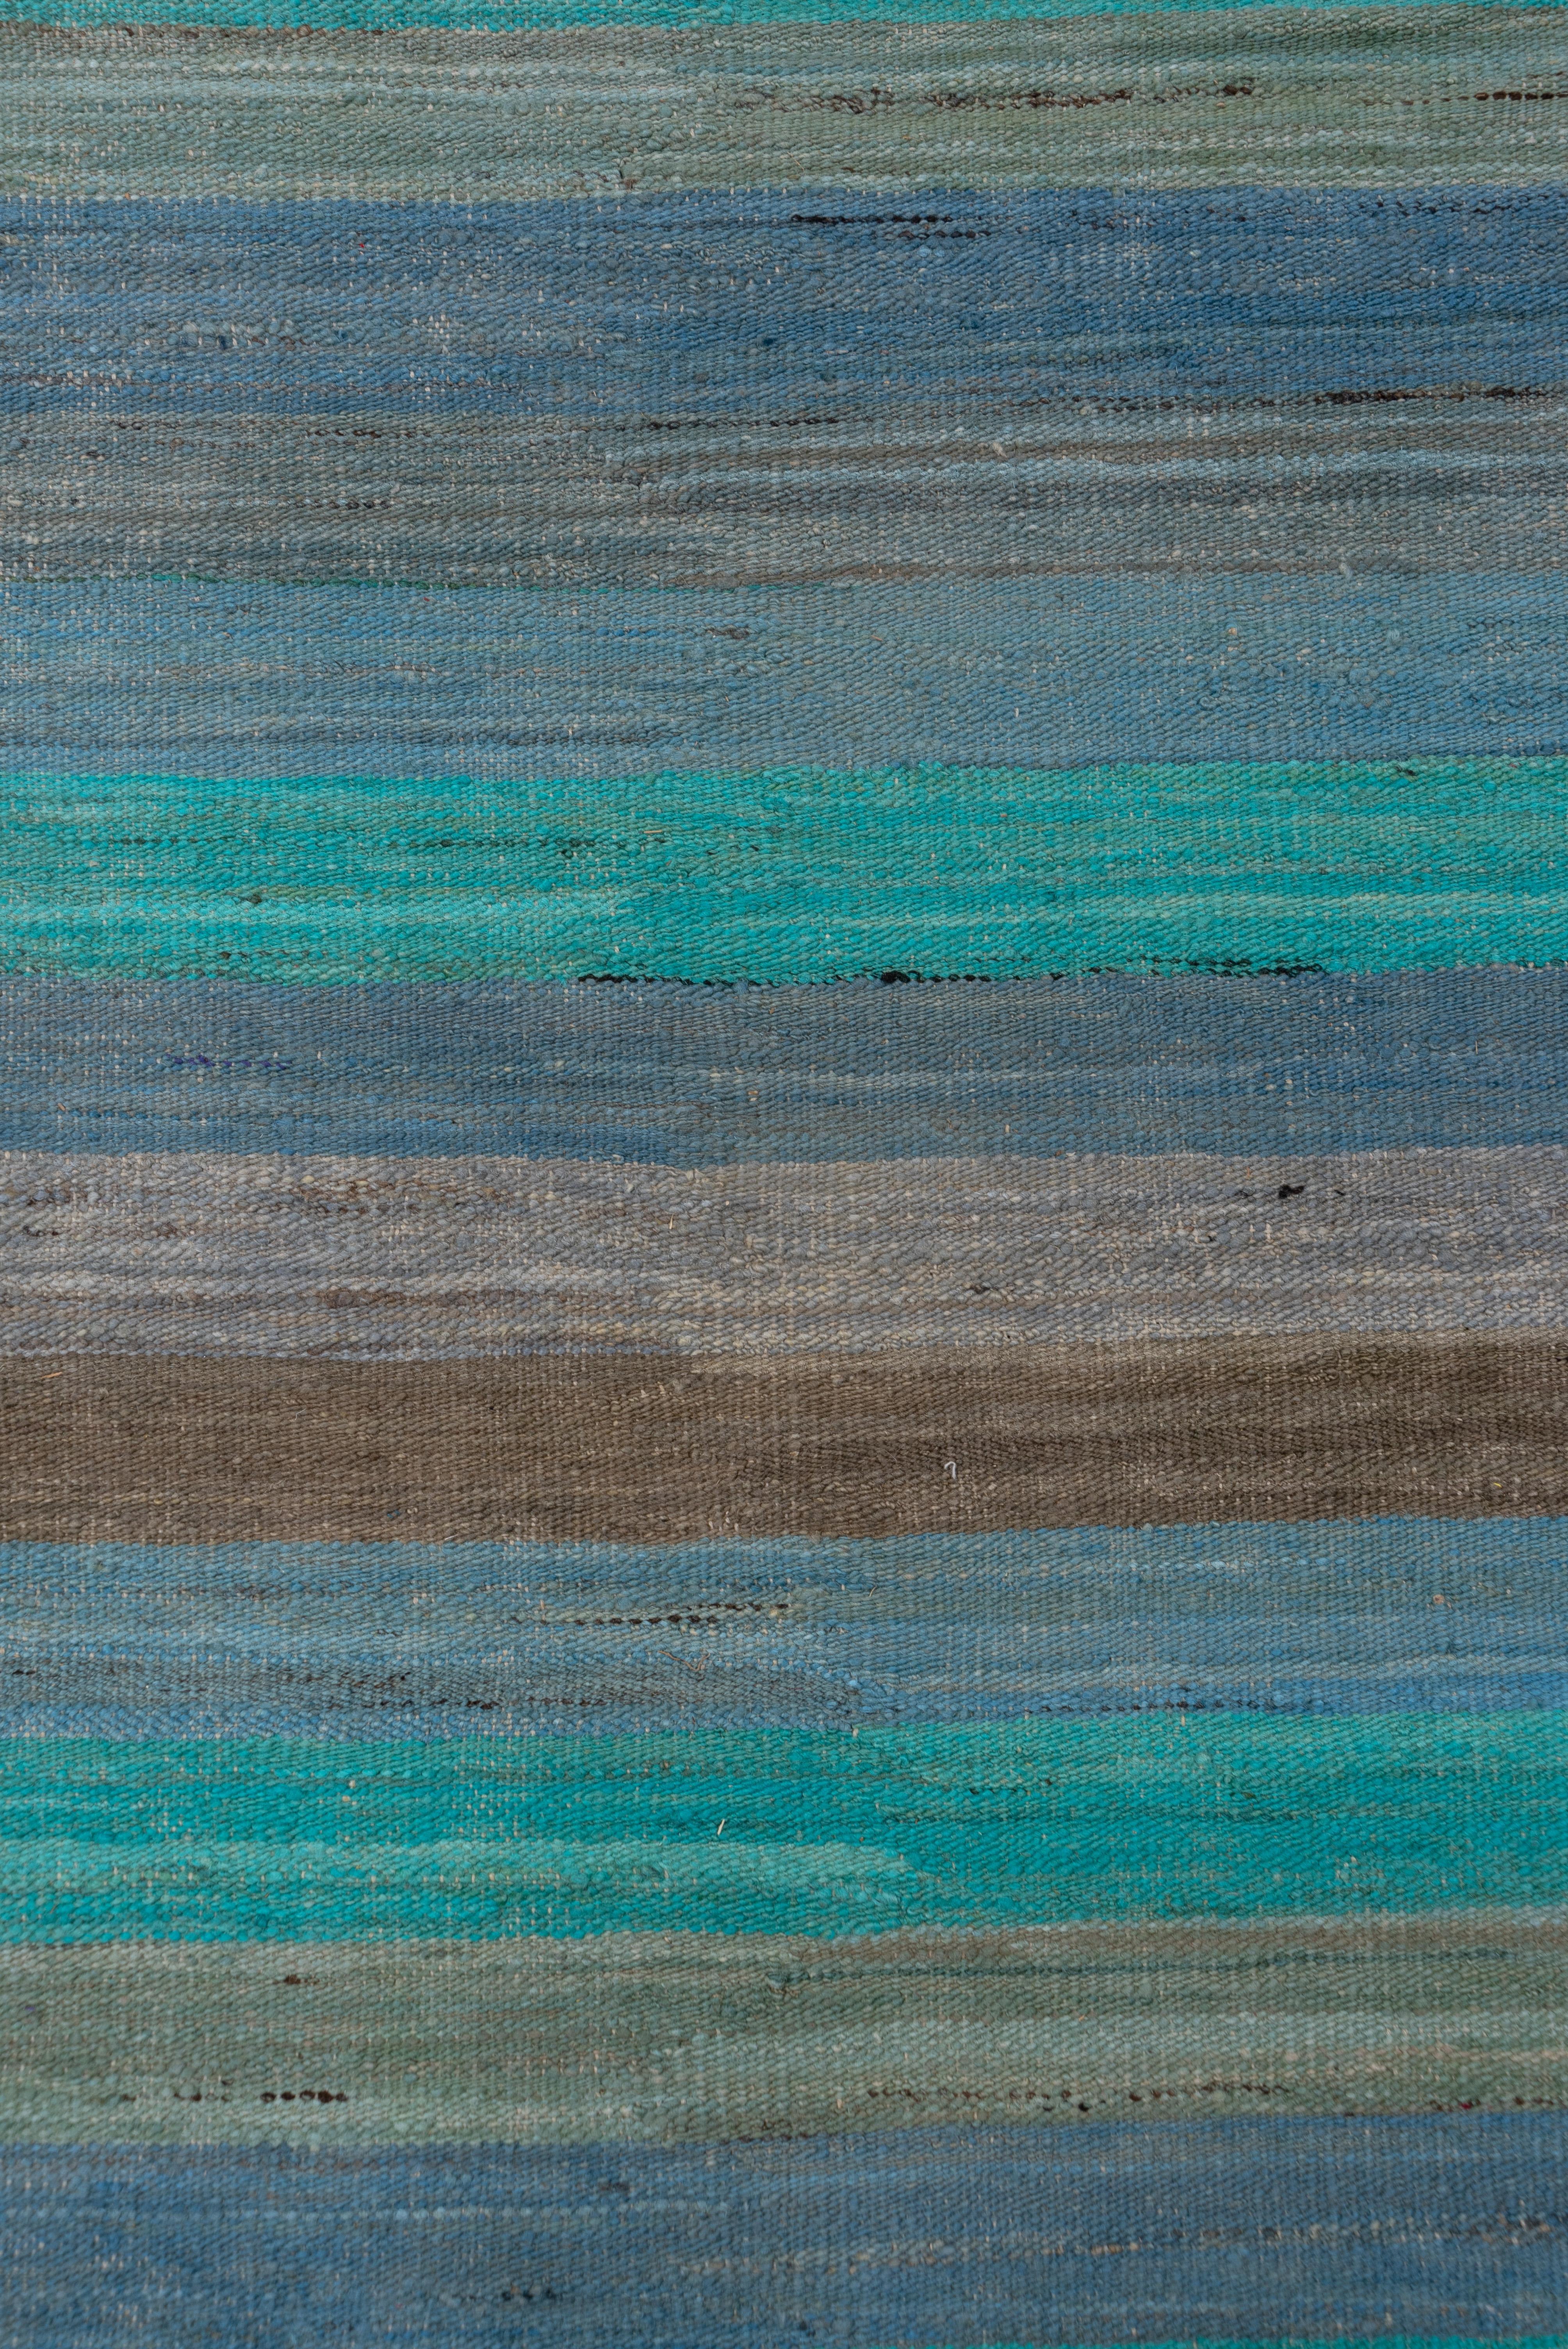 Hand-Woven Contemporary Striped Flatweave Area Rug, Blue, Light Sea Green & Brown Tones For Sale